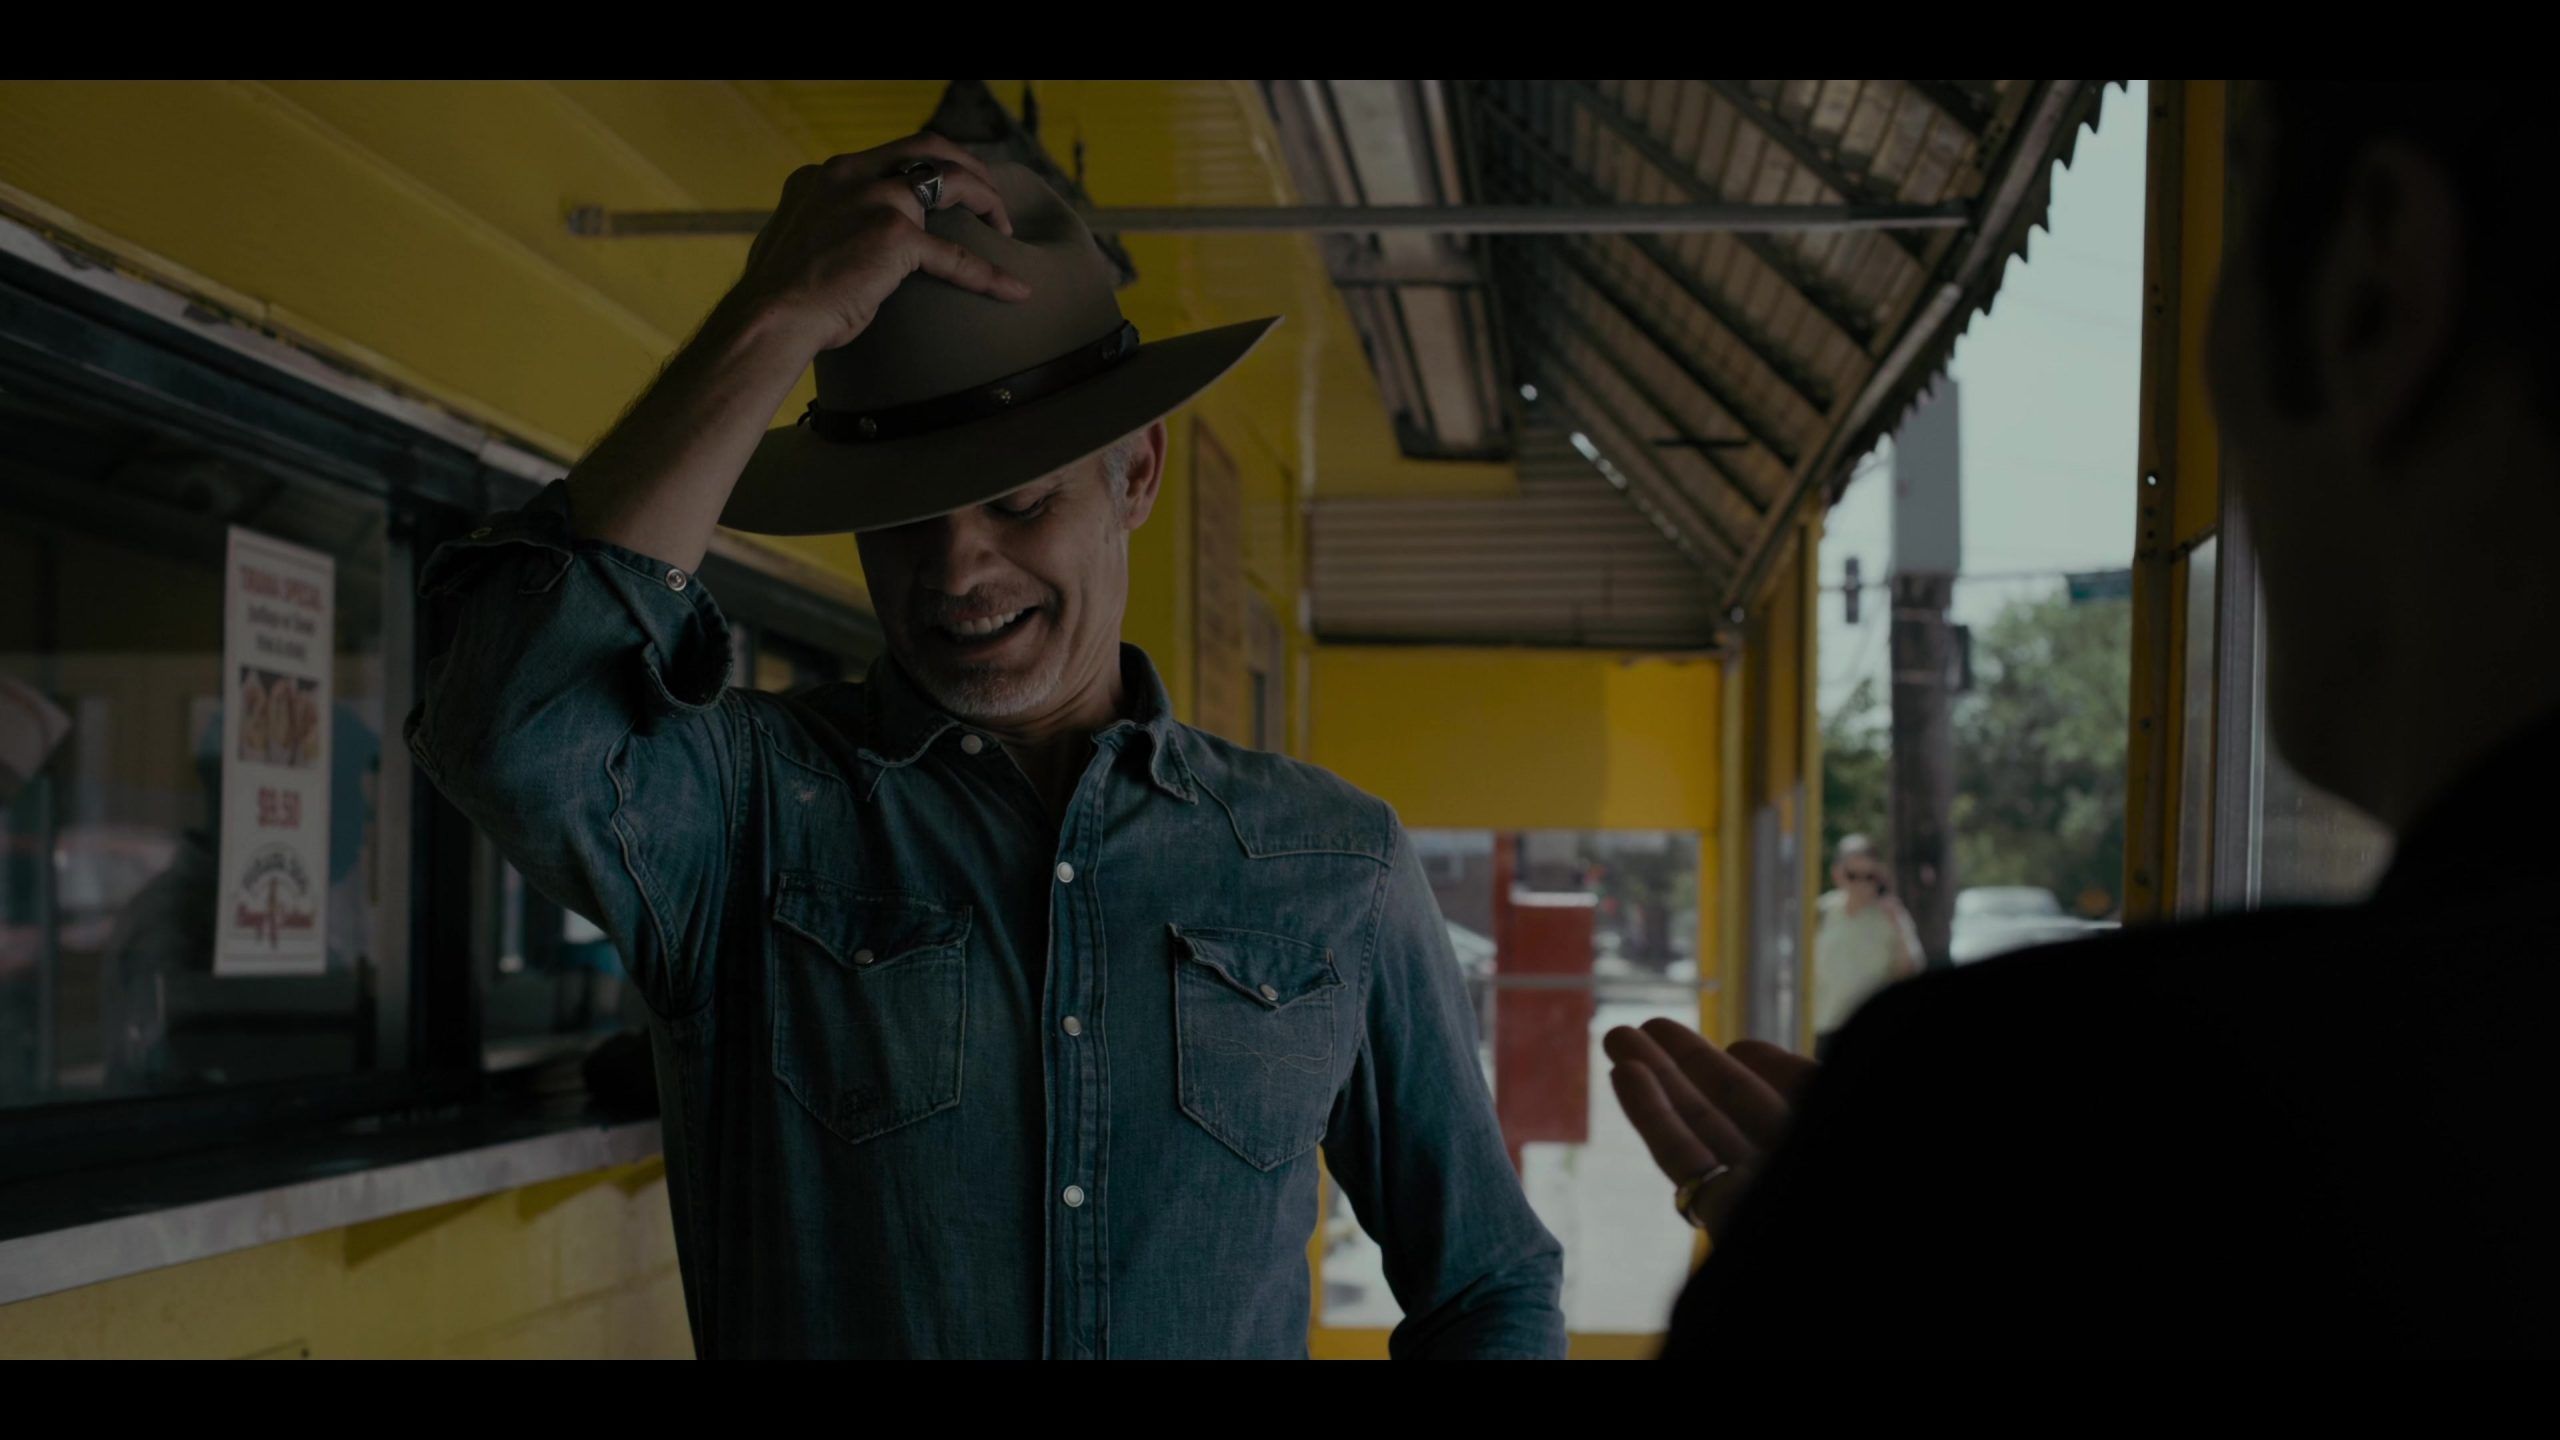 Worn on Justified: City Primeval TV Show - Blue Denim Shirt Worn by Timothy Olyphant as Deputy U.S. Marshal Raylan Givens